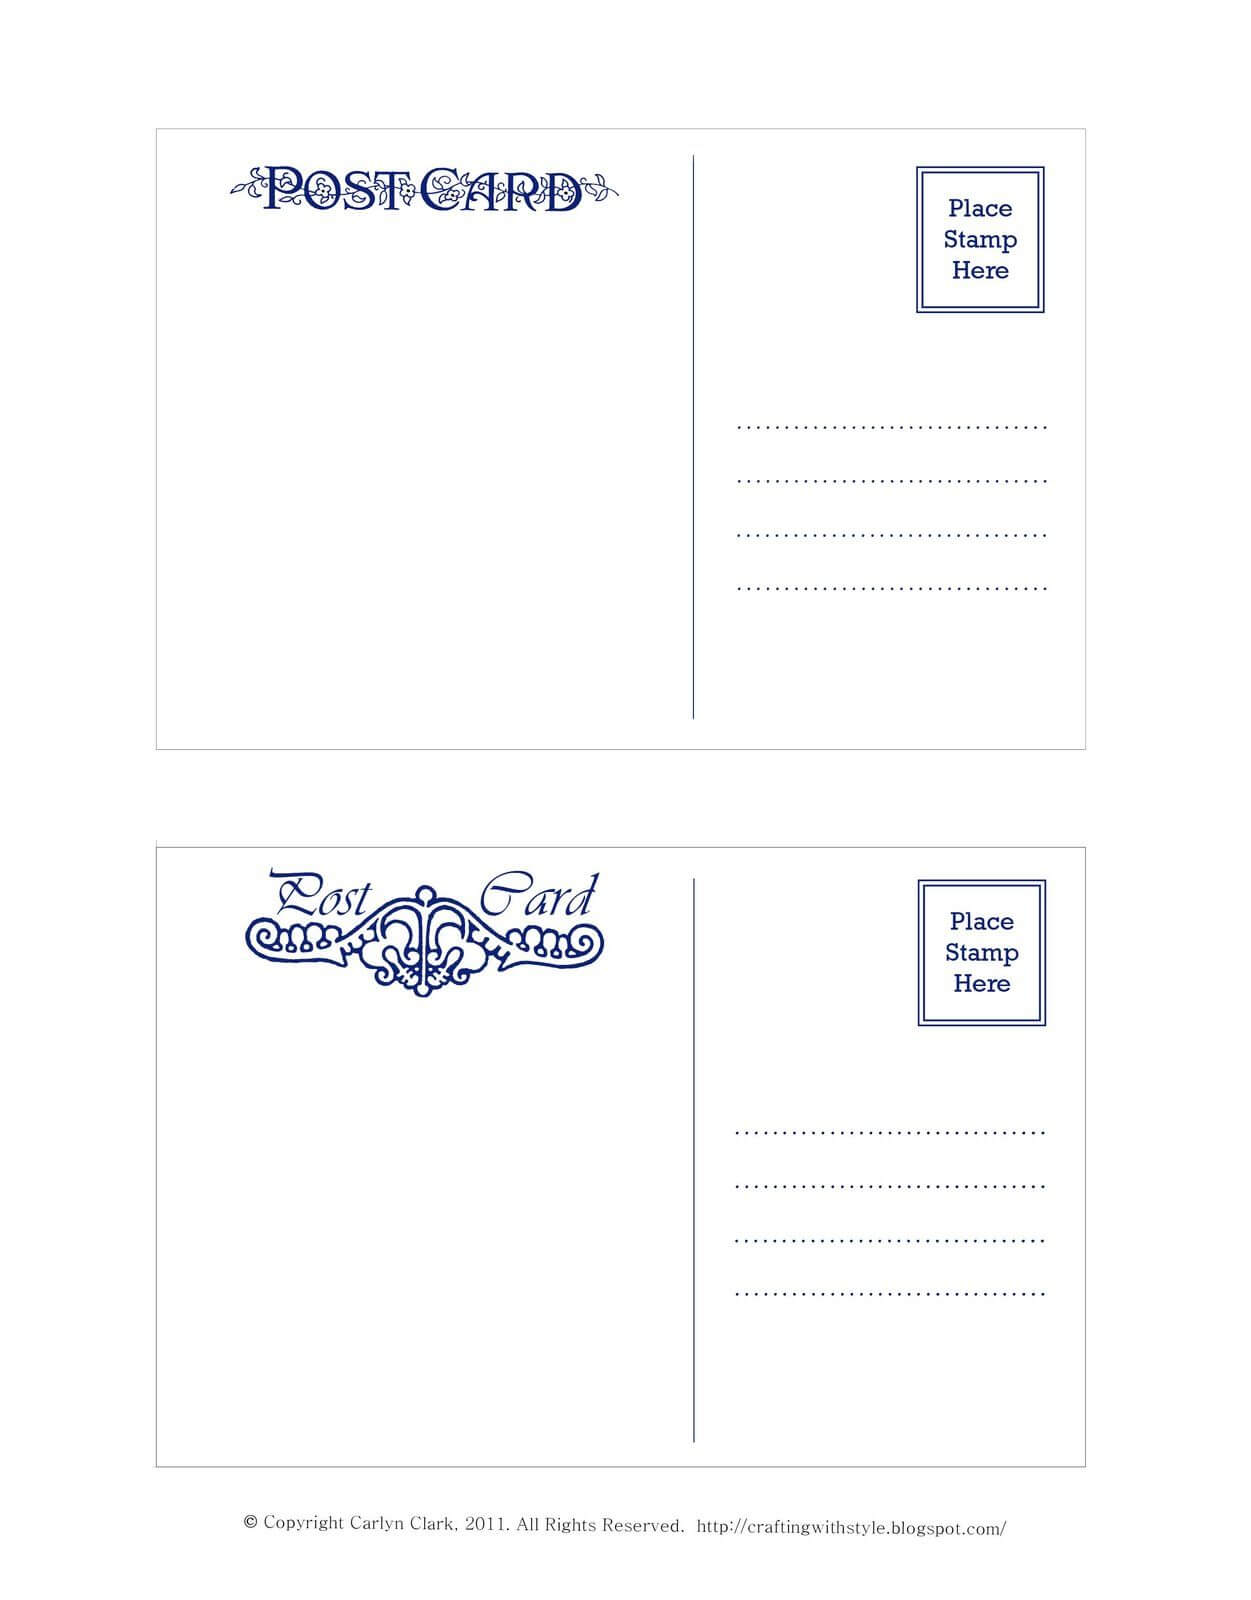 Crafting With Style: Free Postcard Templates | Free With Post Cards Template